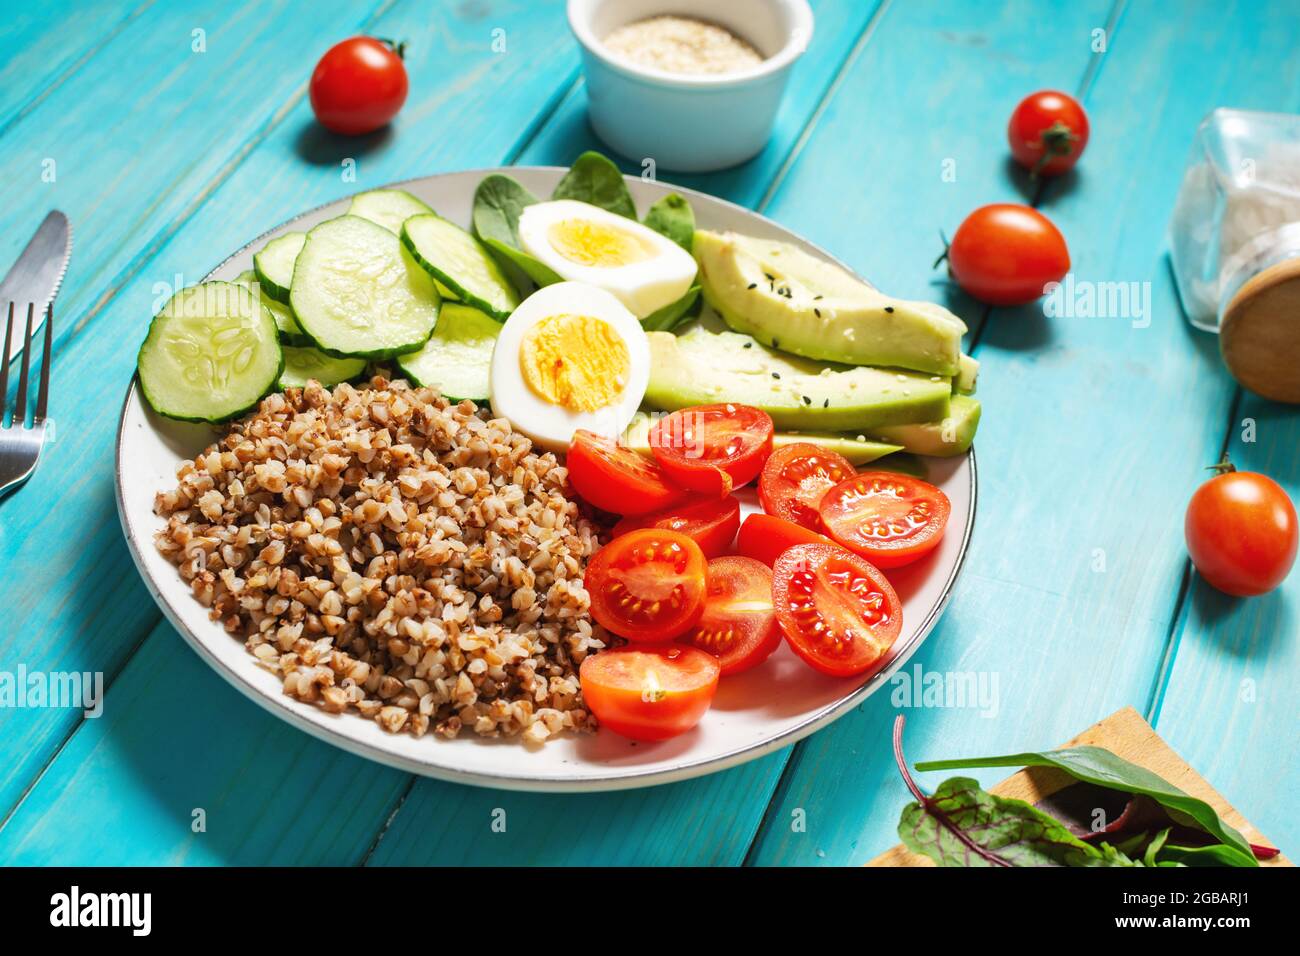 Vegan lunch bowl with avocado, egg, cucumber, tomato and buckwheat on wooden background Stock Photo